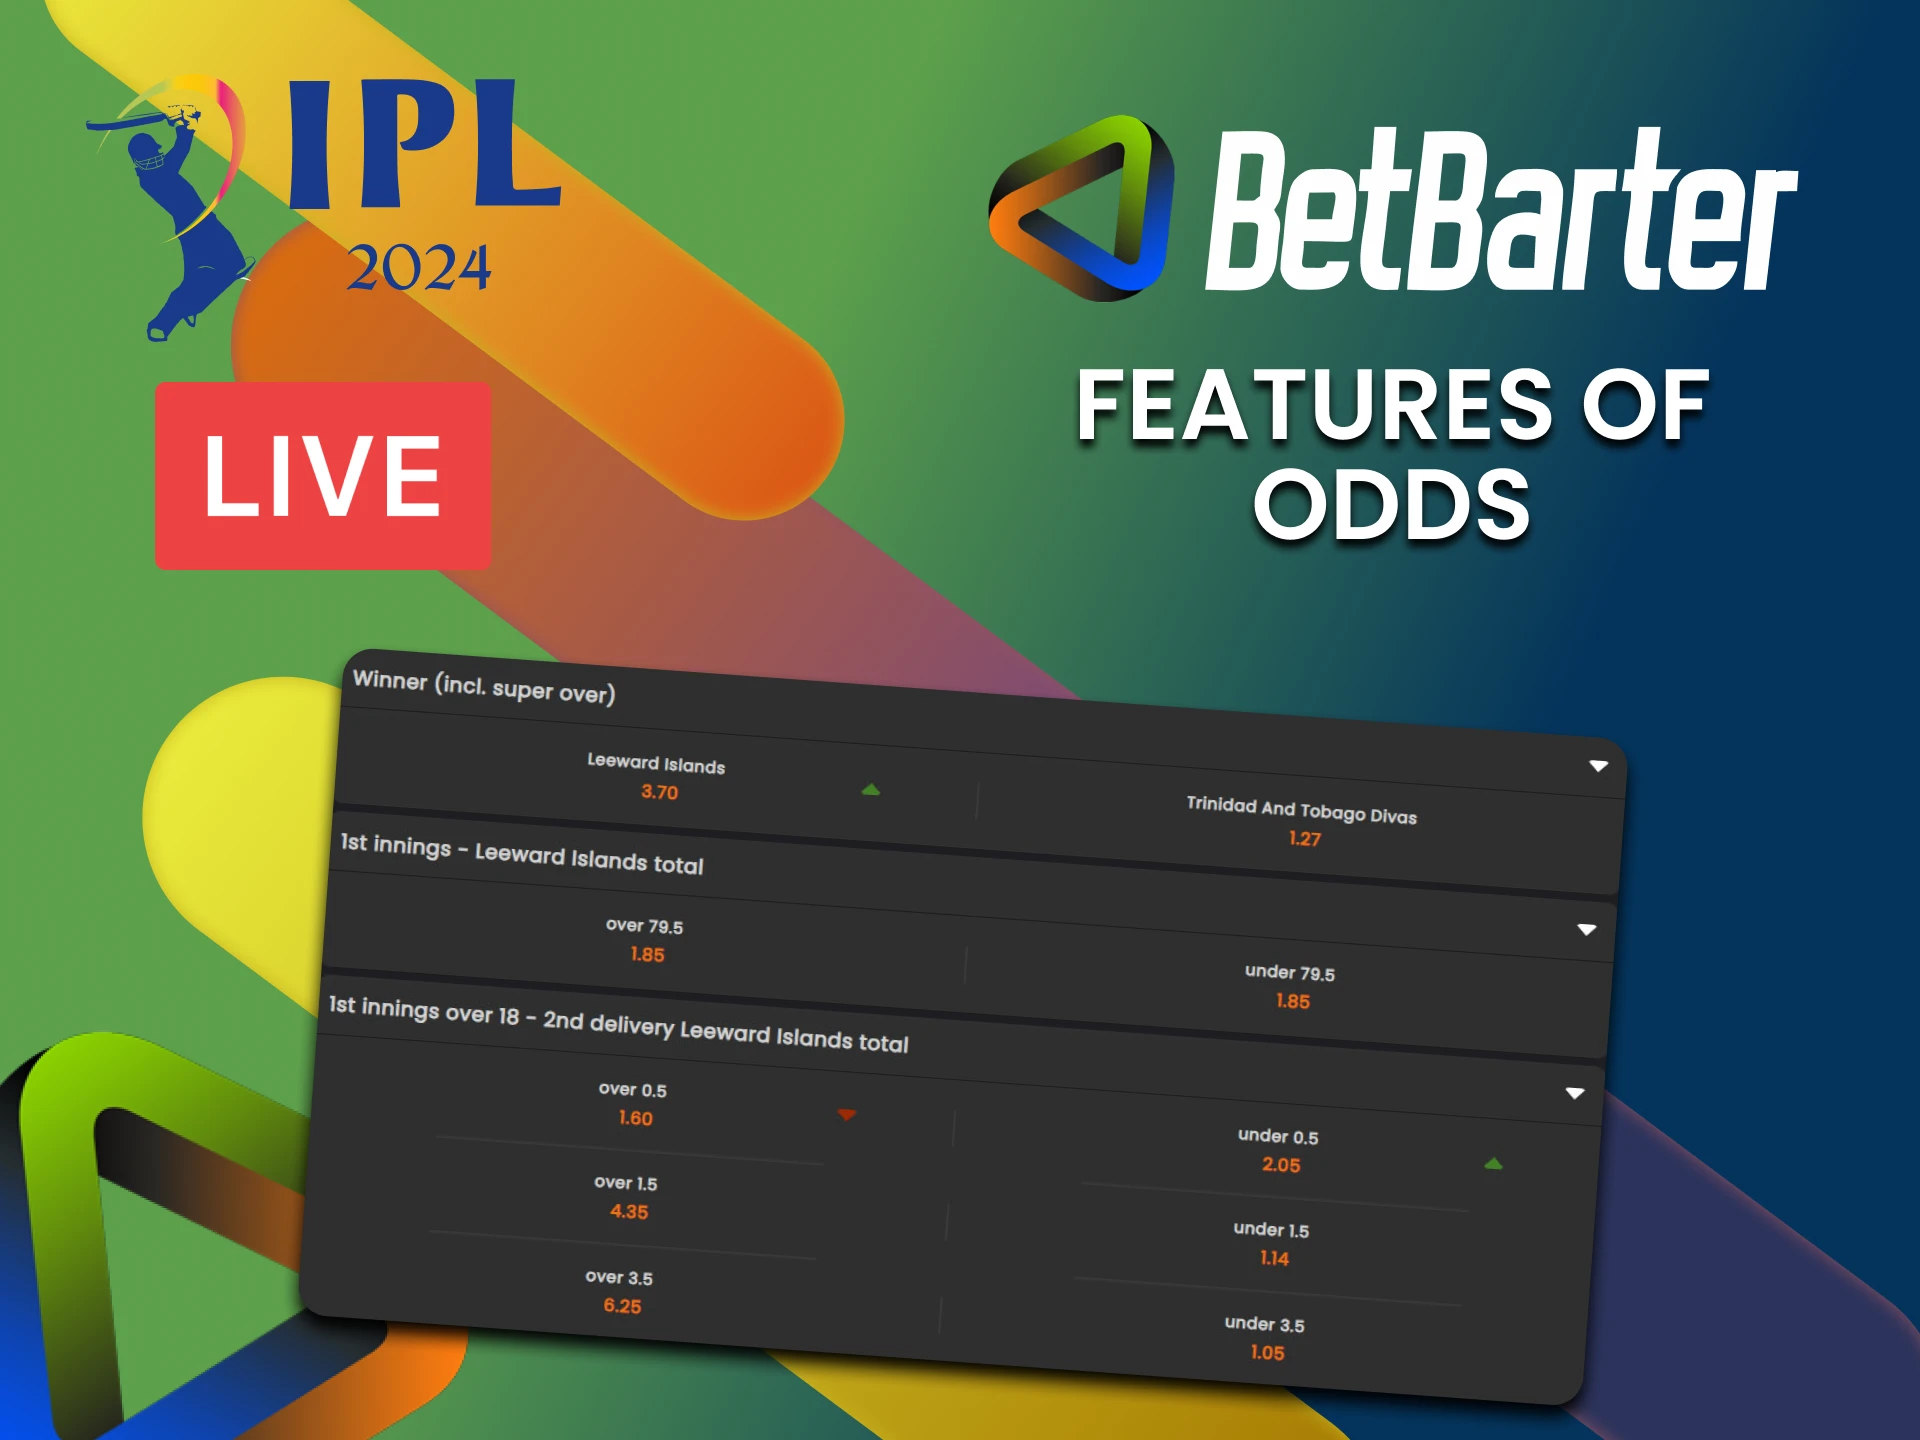 We will tell you about the odds for live events in the IPL on BetBarter.